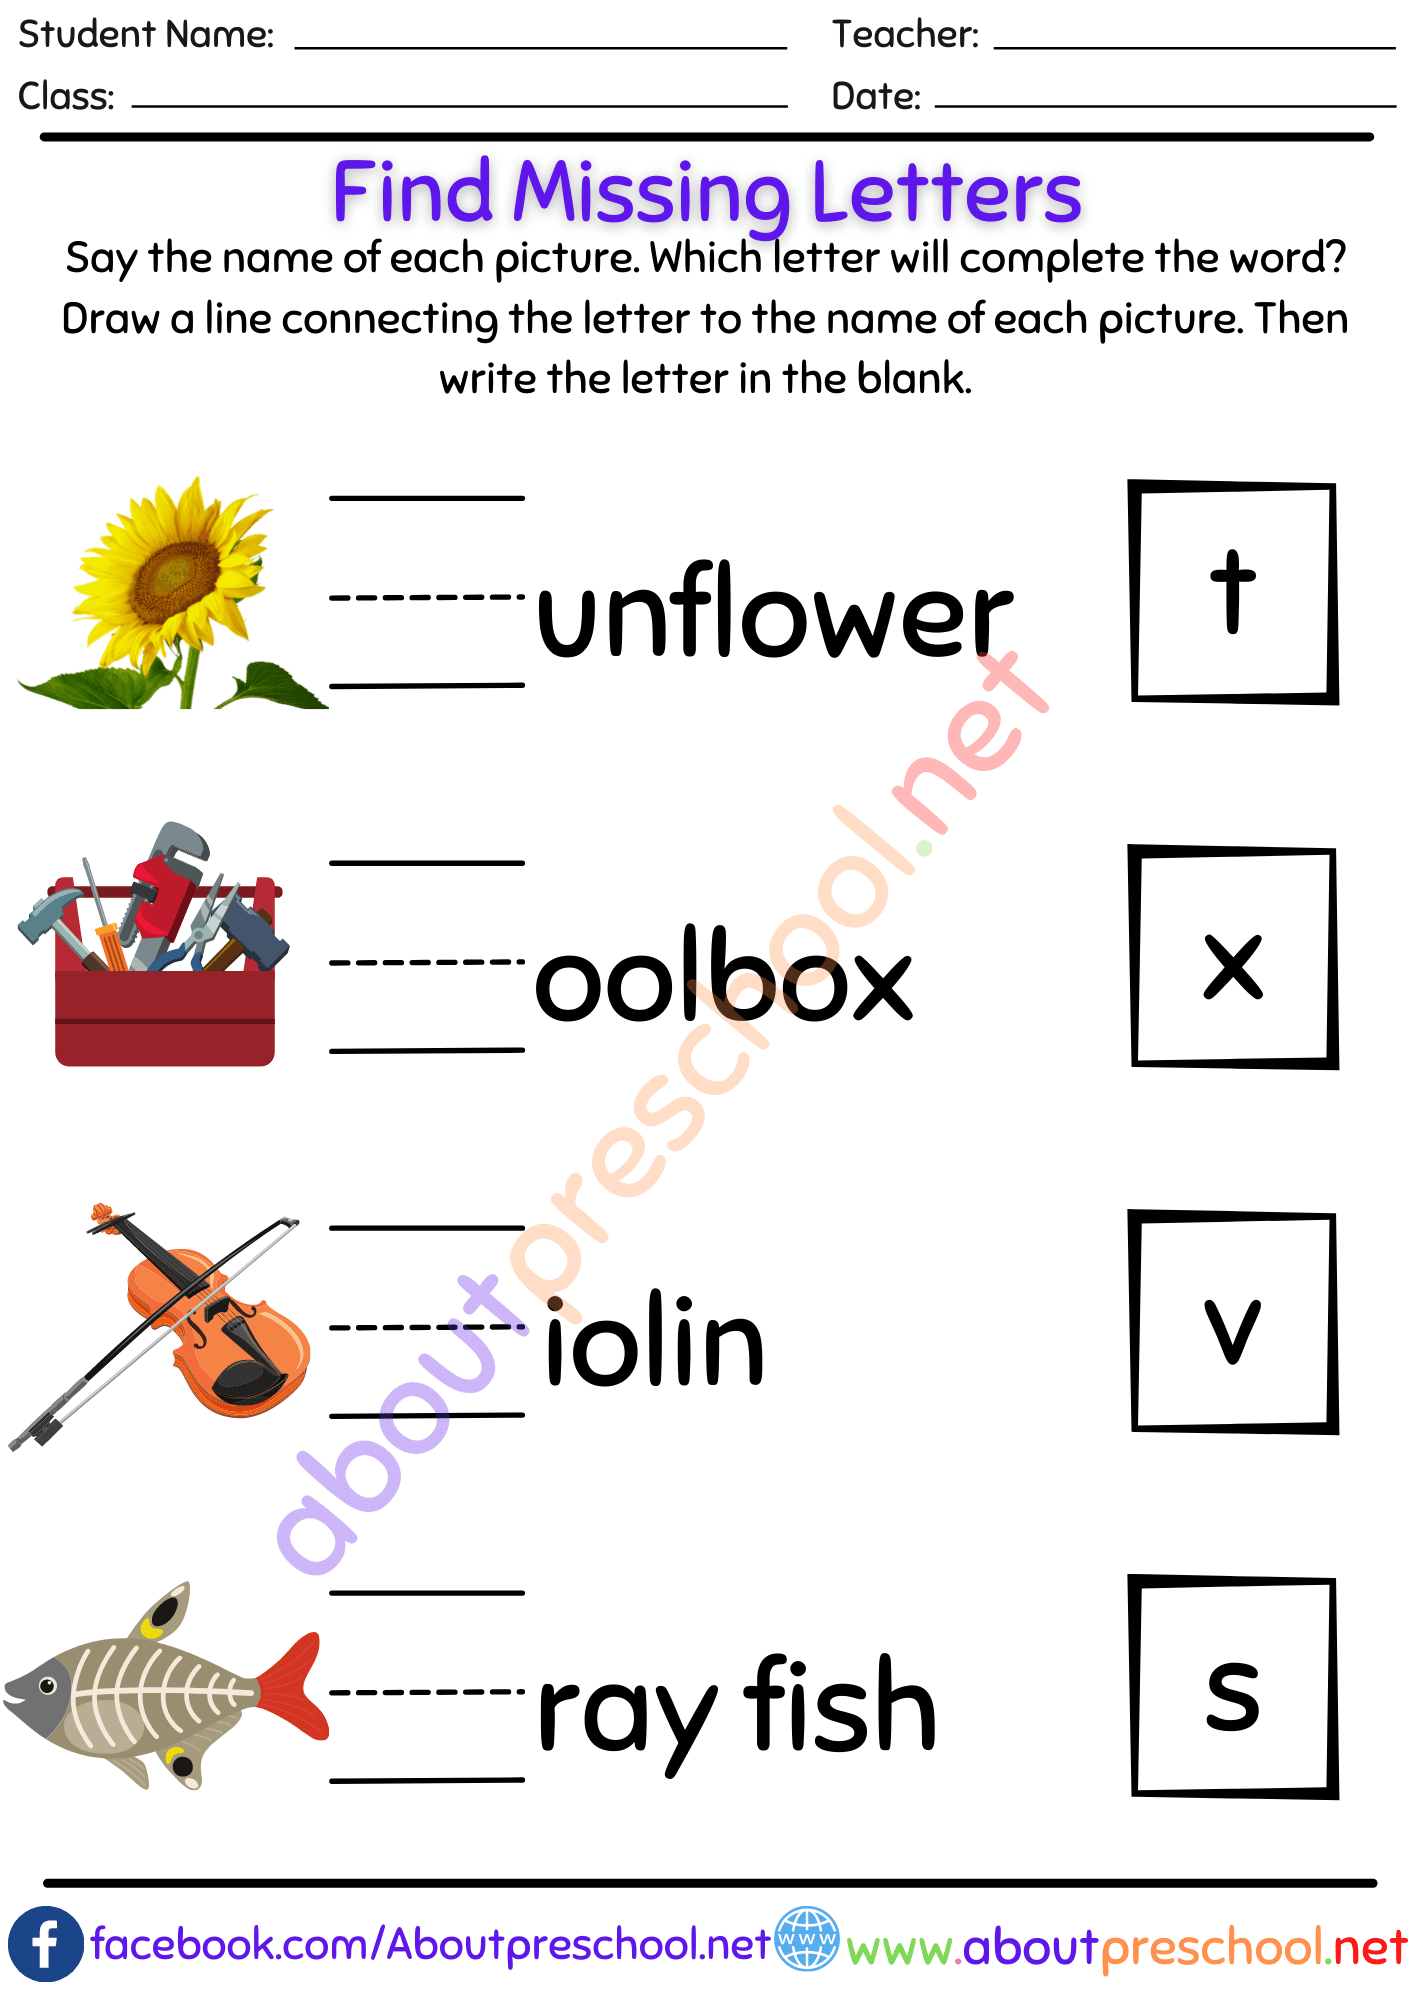 Find Missing Letters-13